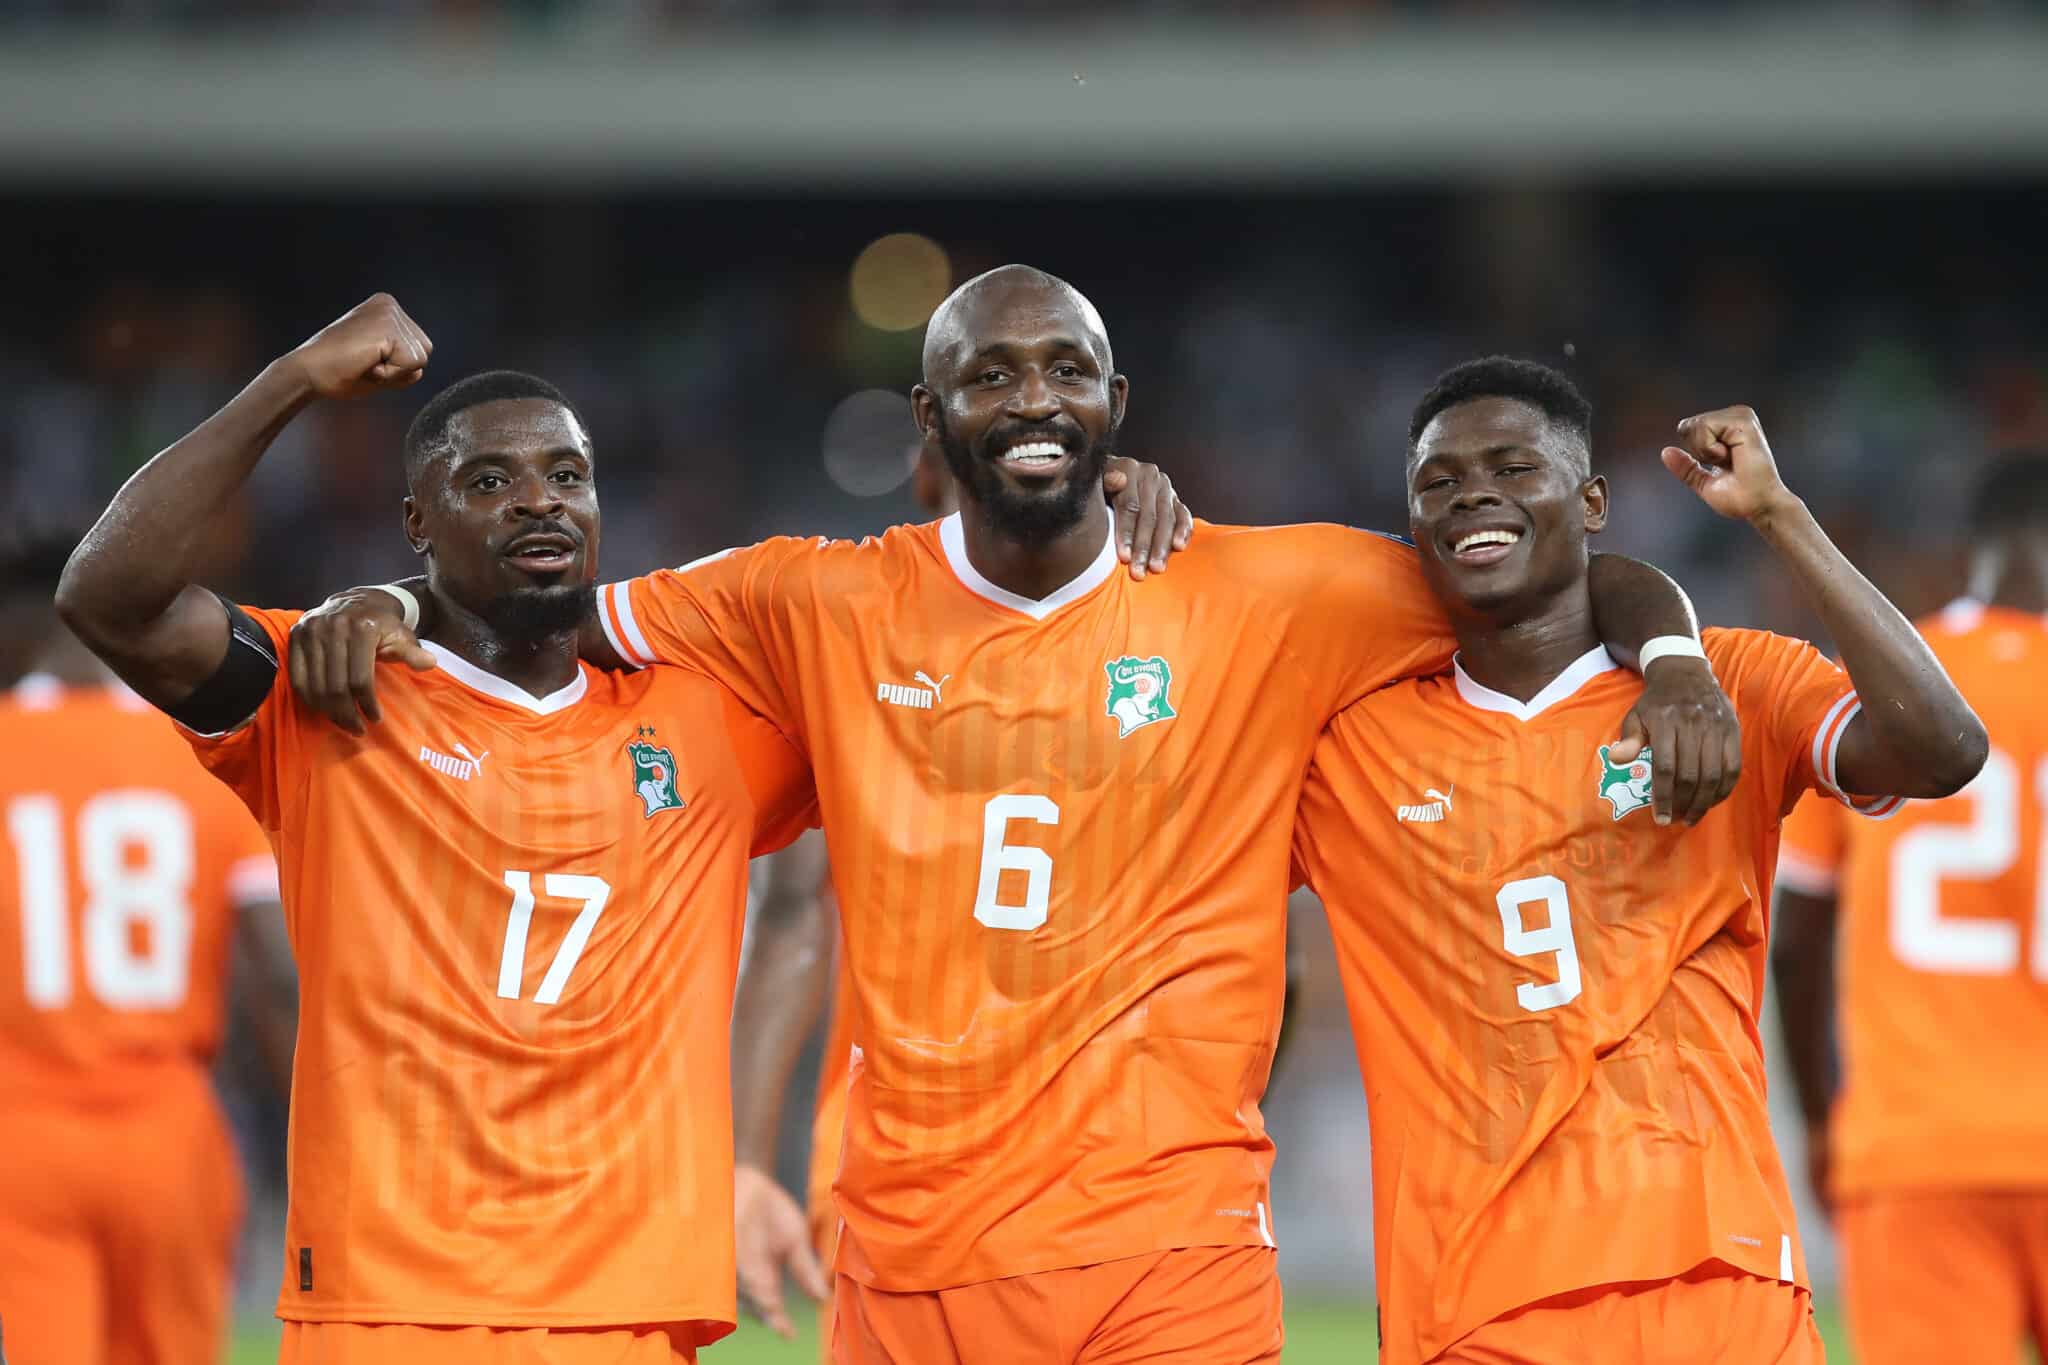 AFCON 2023 Opening Match Preview- Ivory Coast v Guinea Bissau